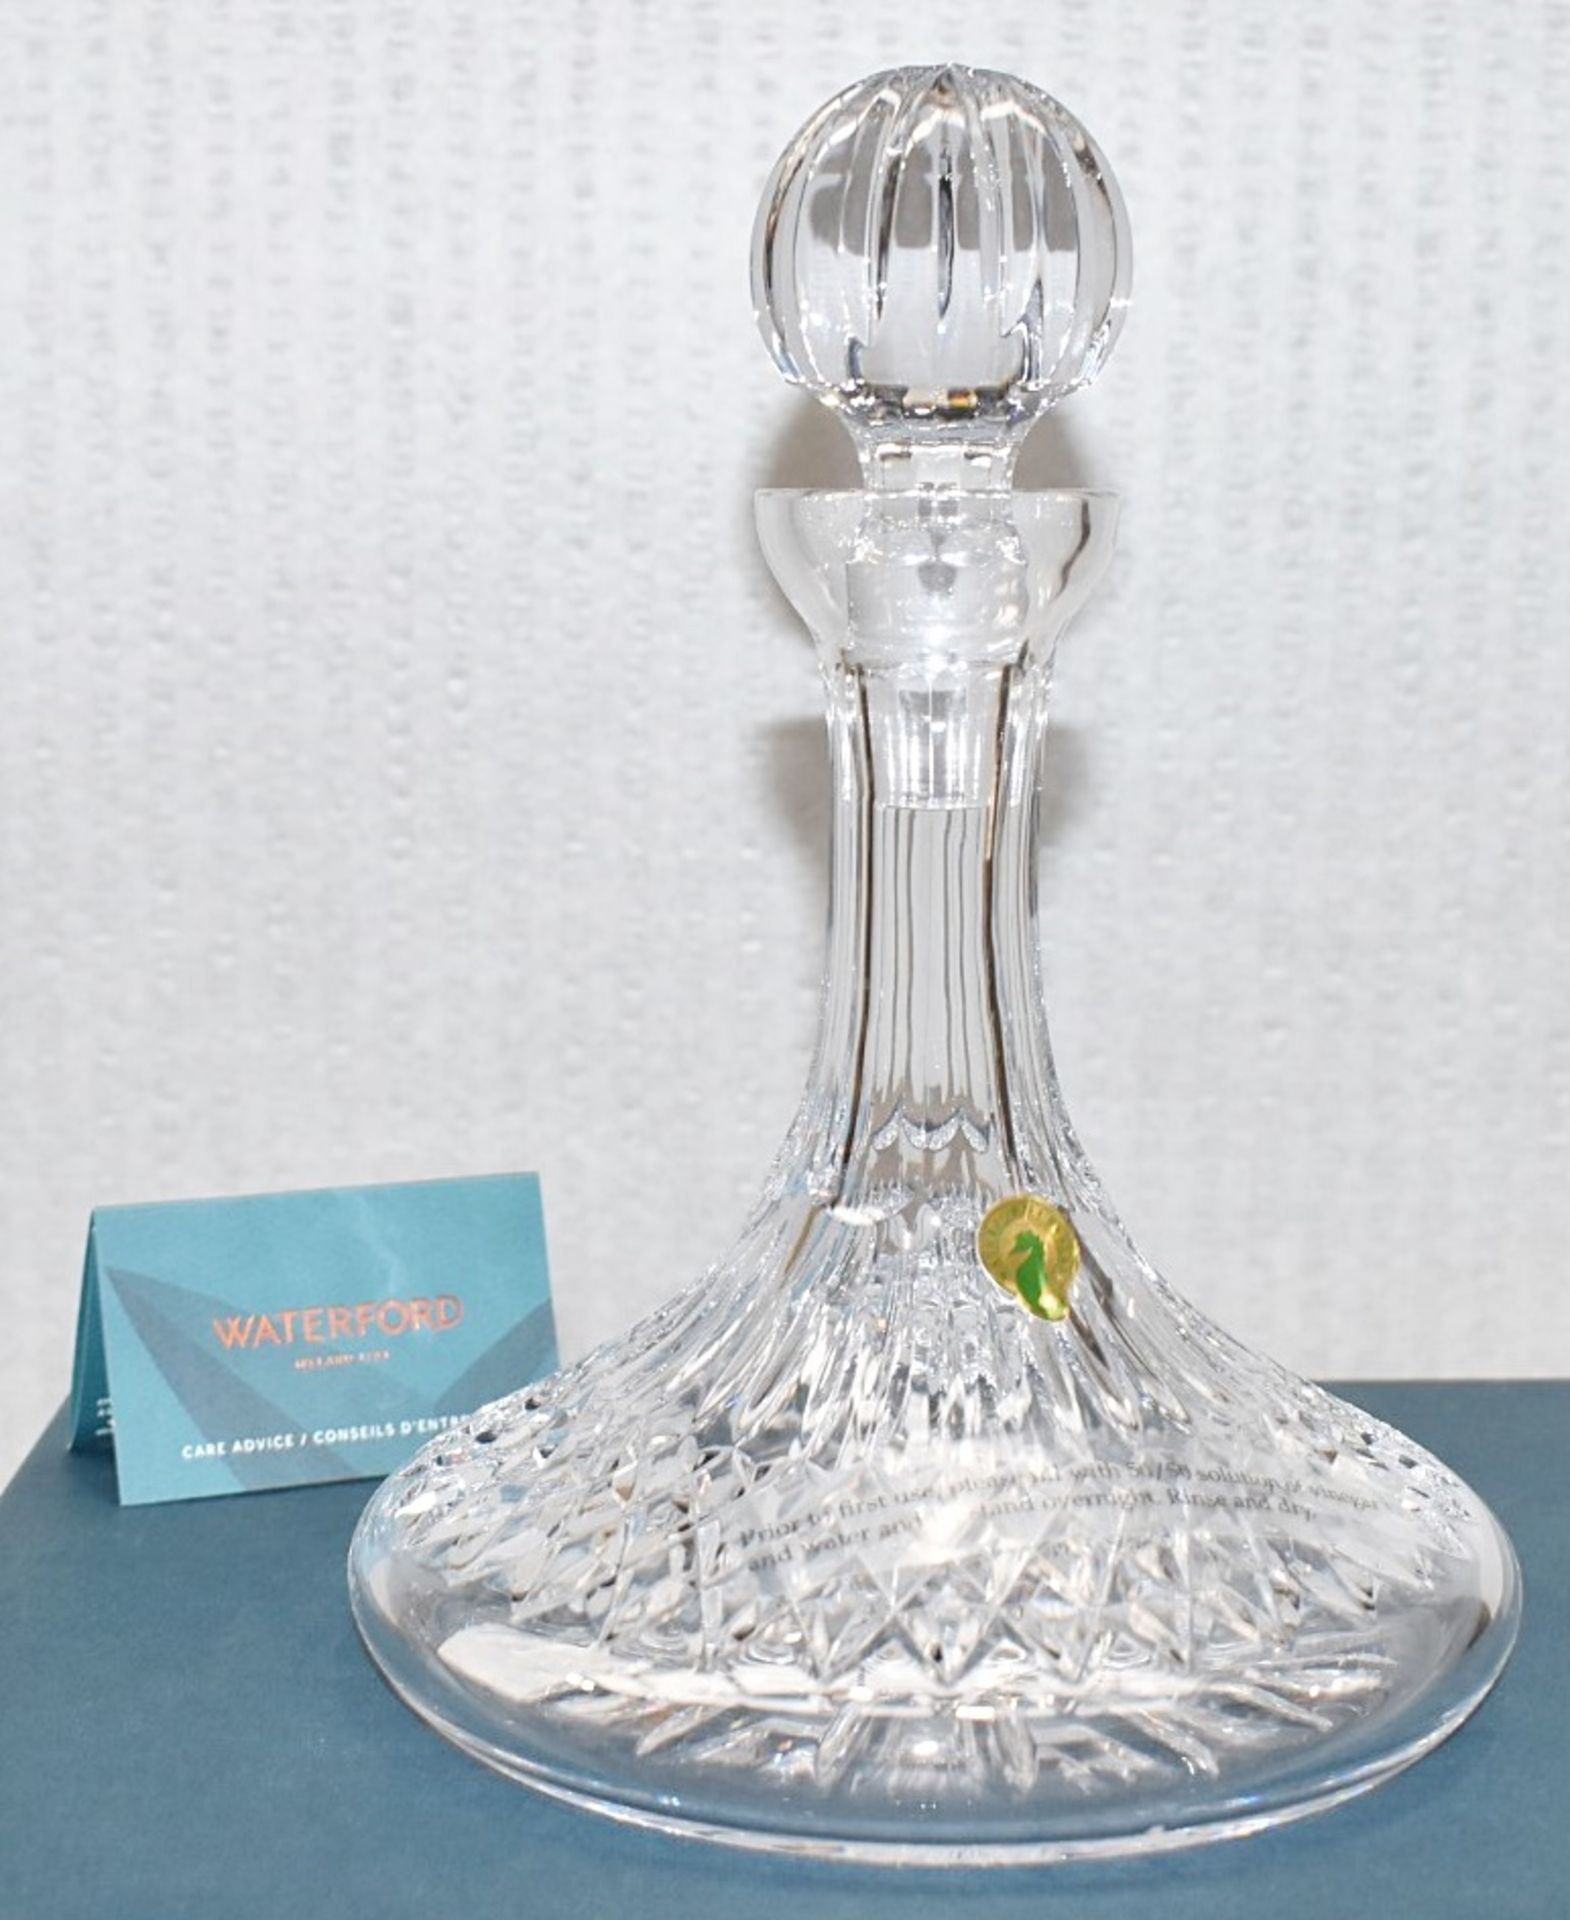 1 x WATERFORD 'Lismore' Lead Crystal Ships Decanter (850ml) - Original Price £450.00 - Boxed - Image 3 of 9